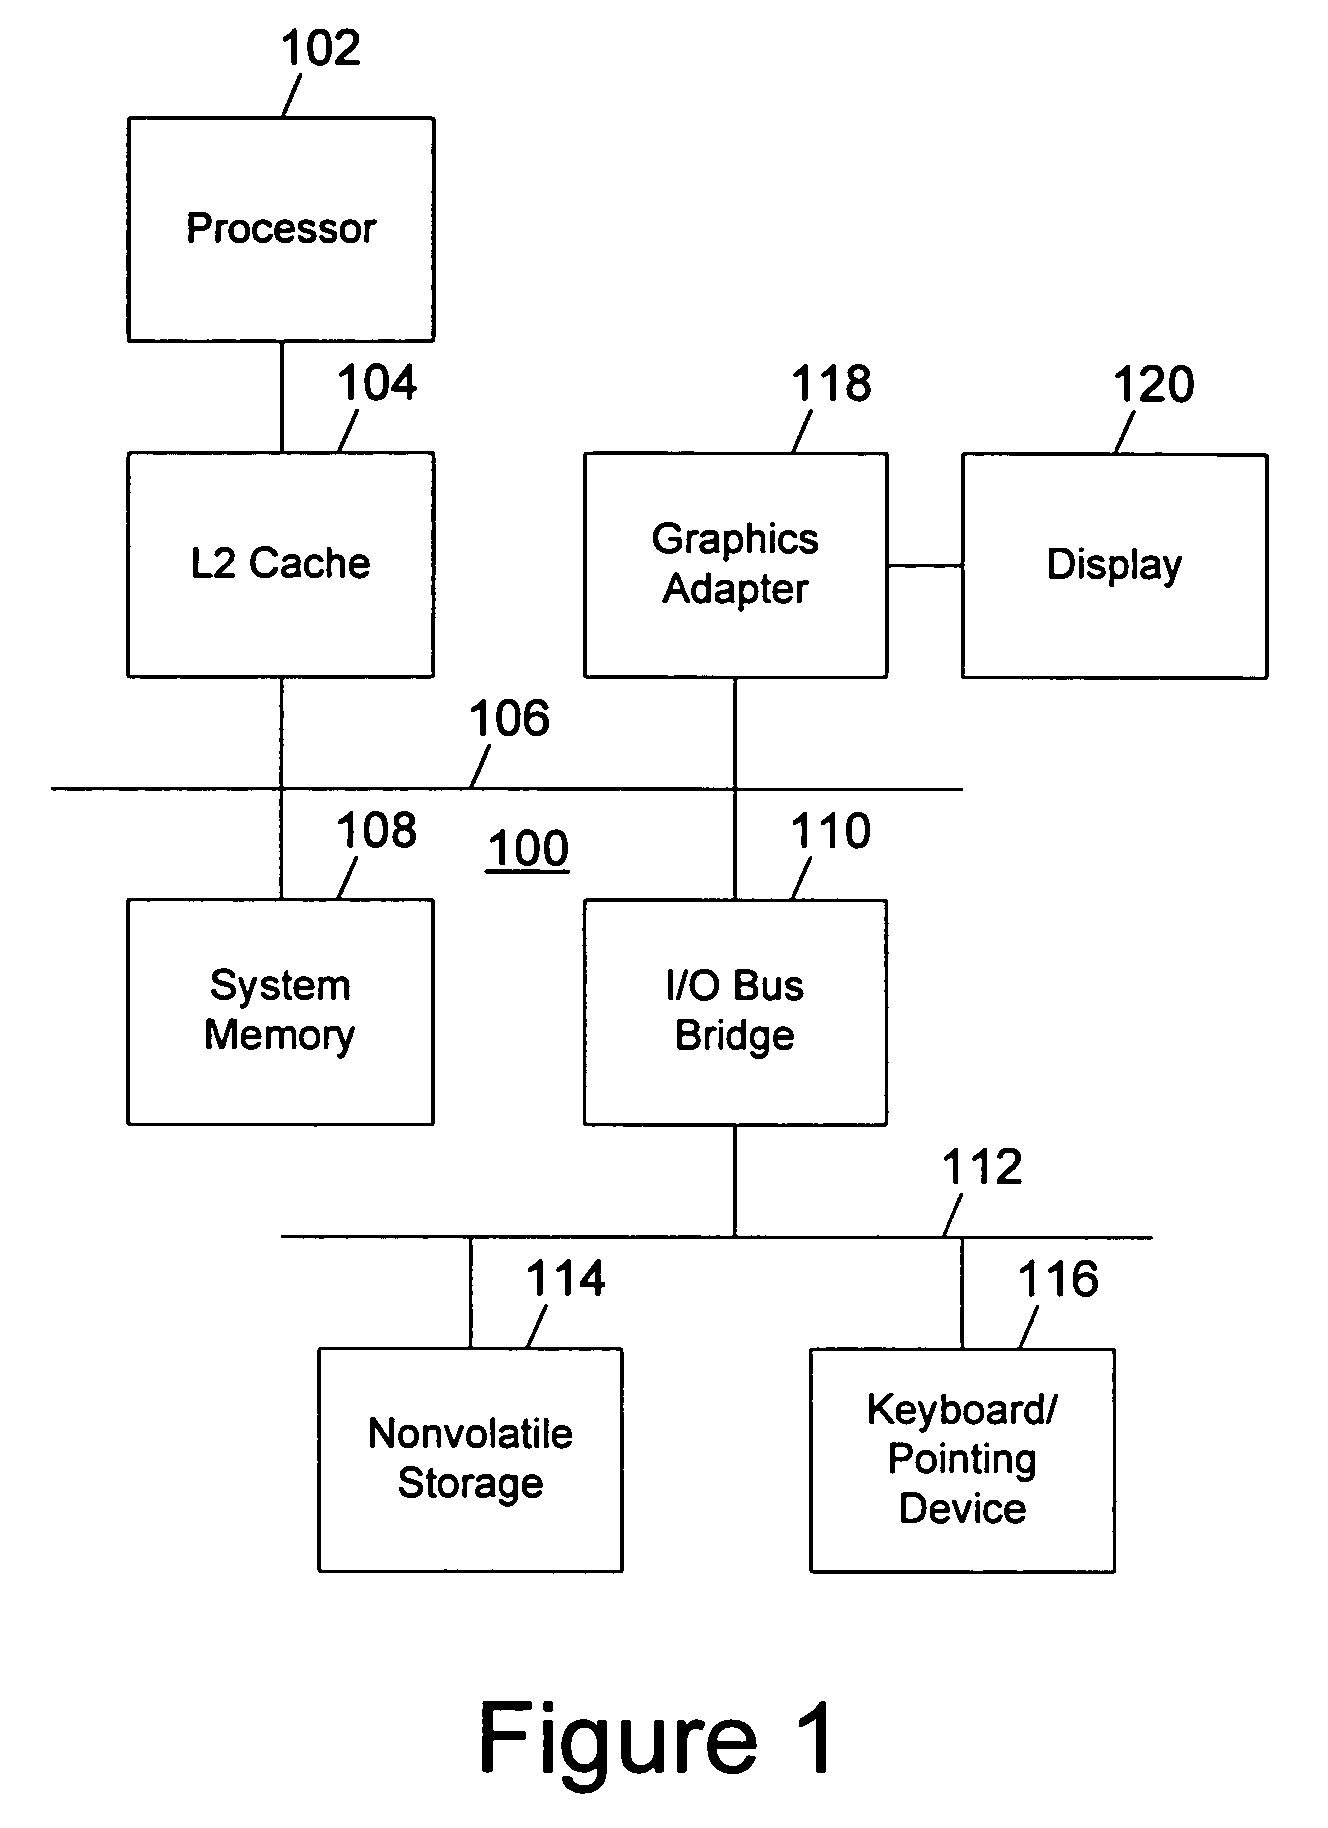 Method for computing models based on attributes selected by entropy